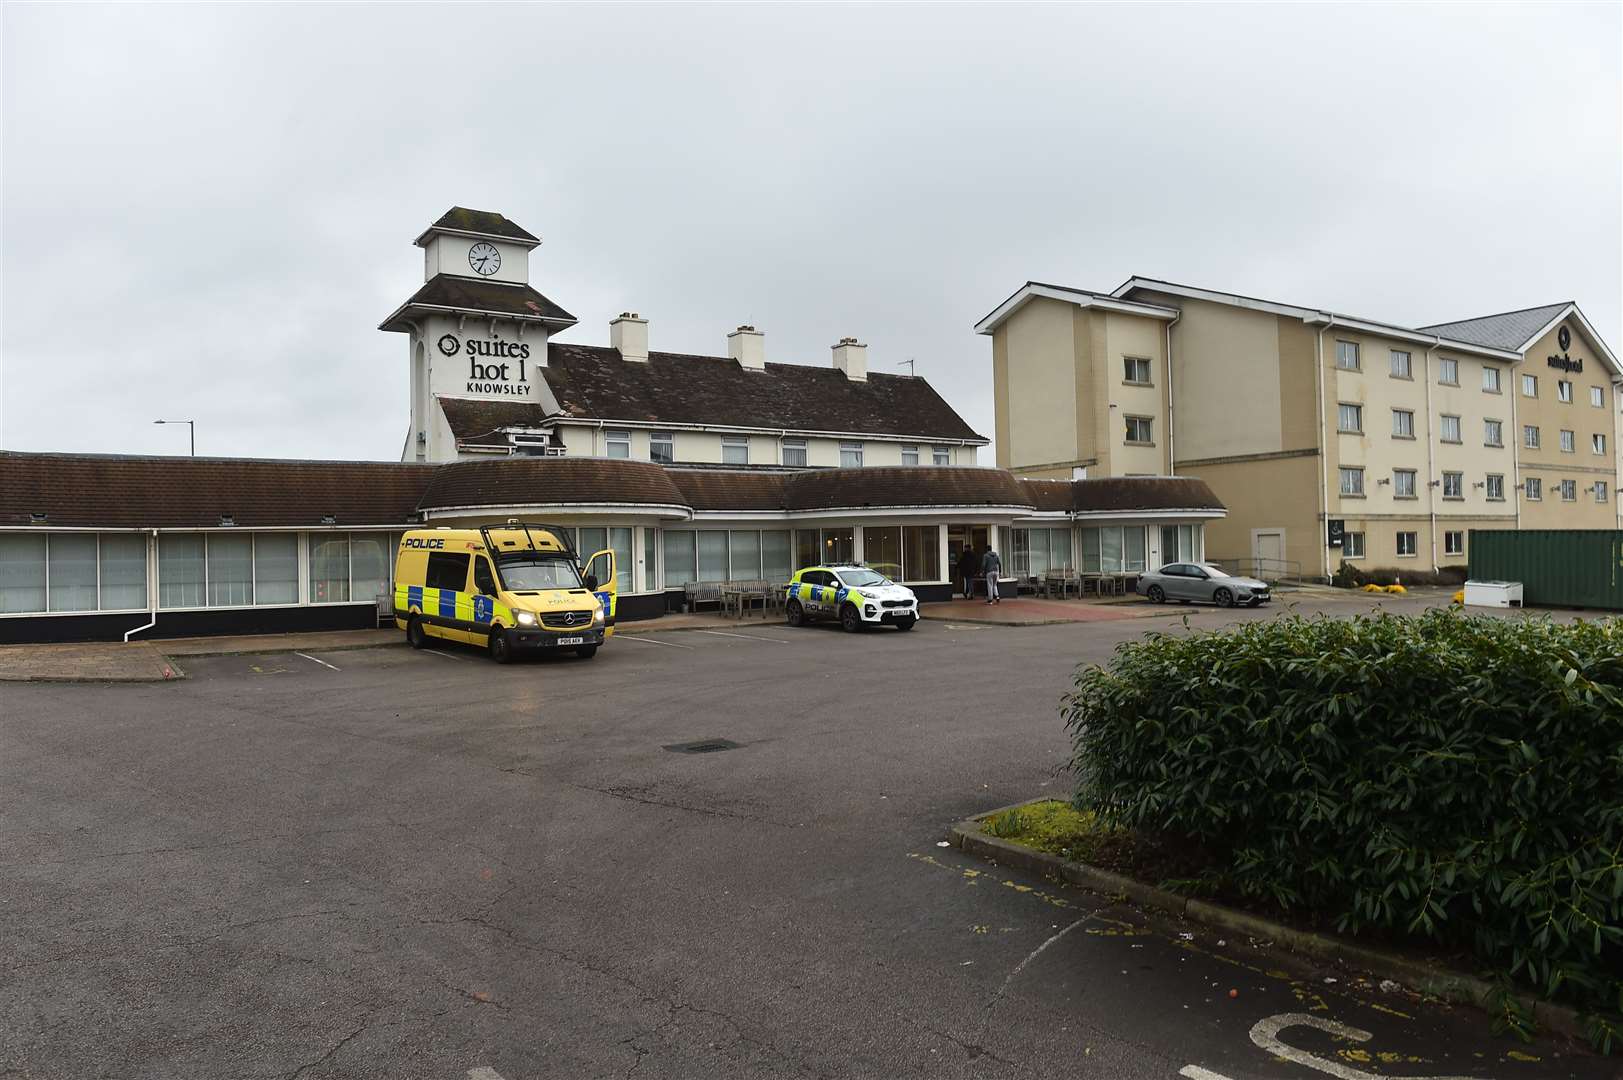 The trial has heard there was ‘ill feeling’ in the Kirkby area after a video appearing to show an asylum seeker from the hotel asking a 15-year-old girl for her phone number was shared on social media (Peter Powell/PA)